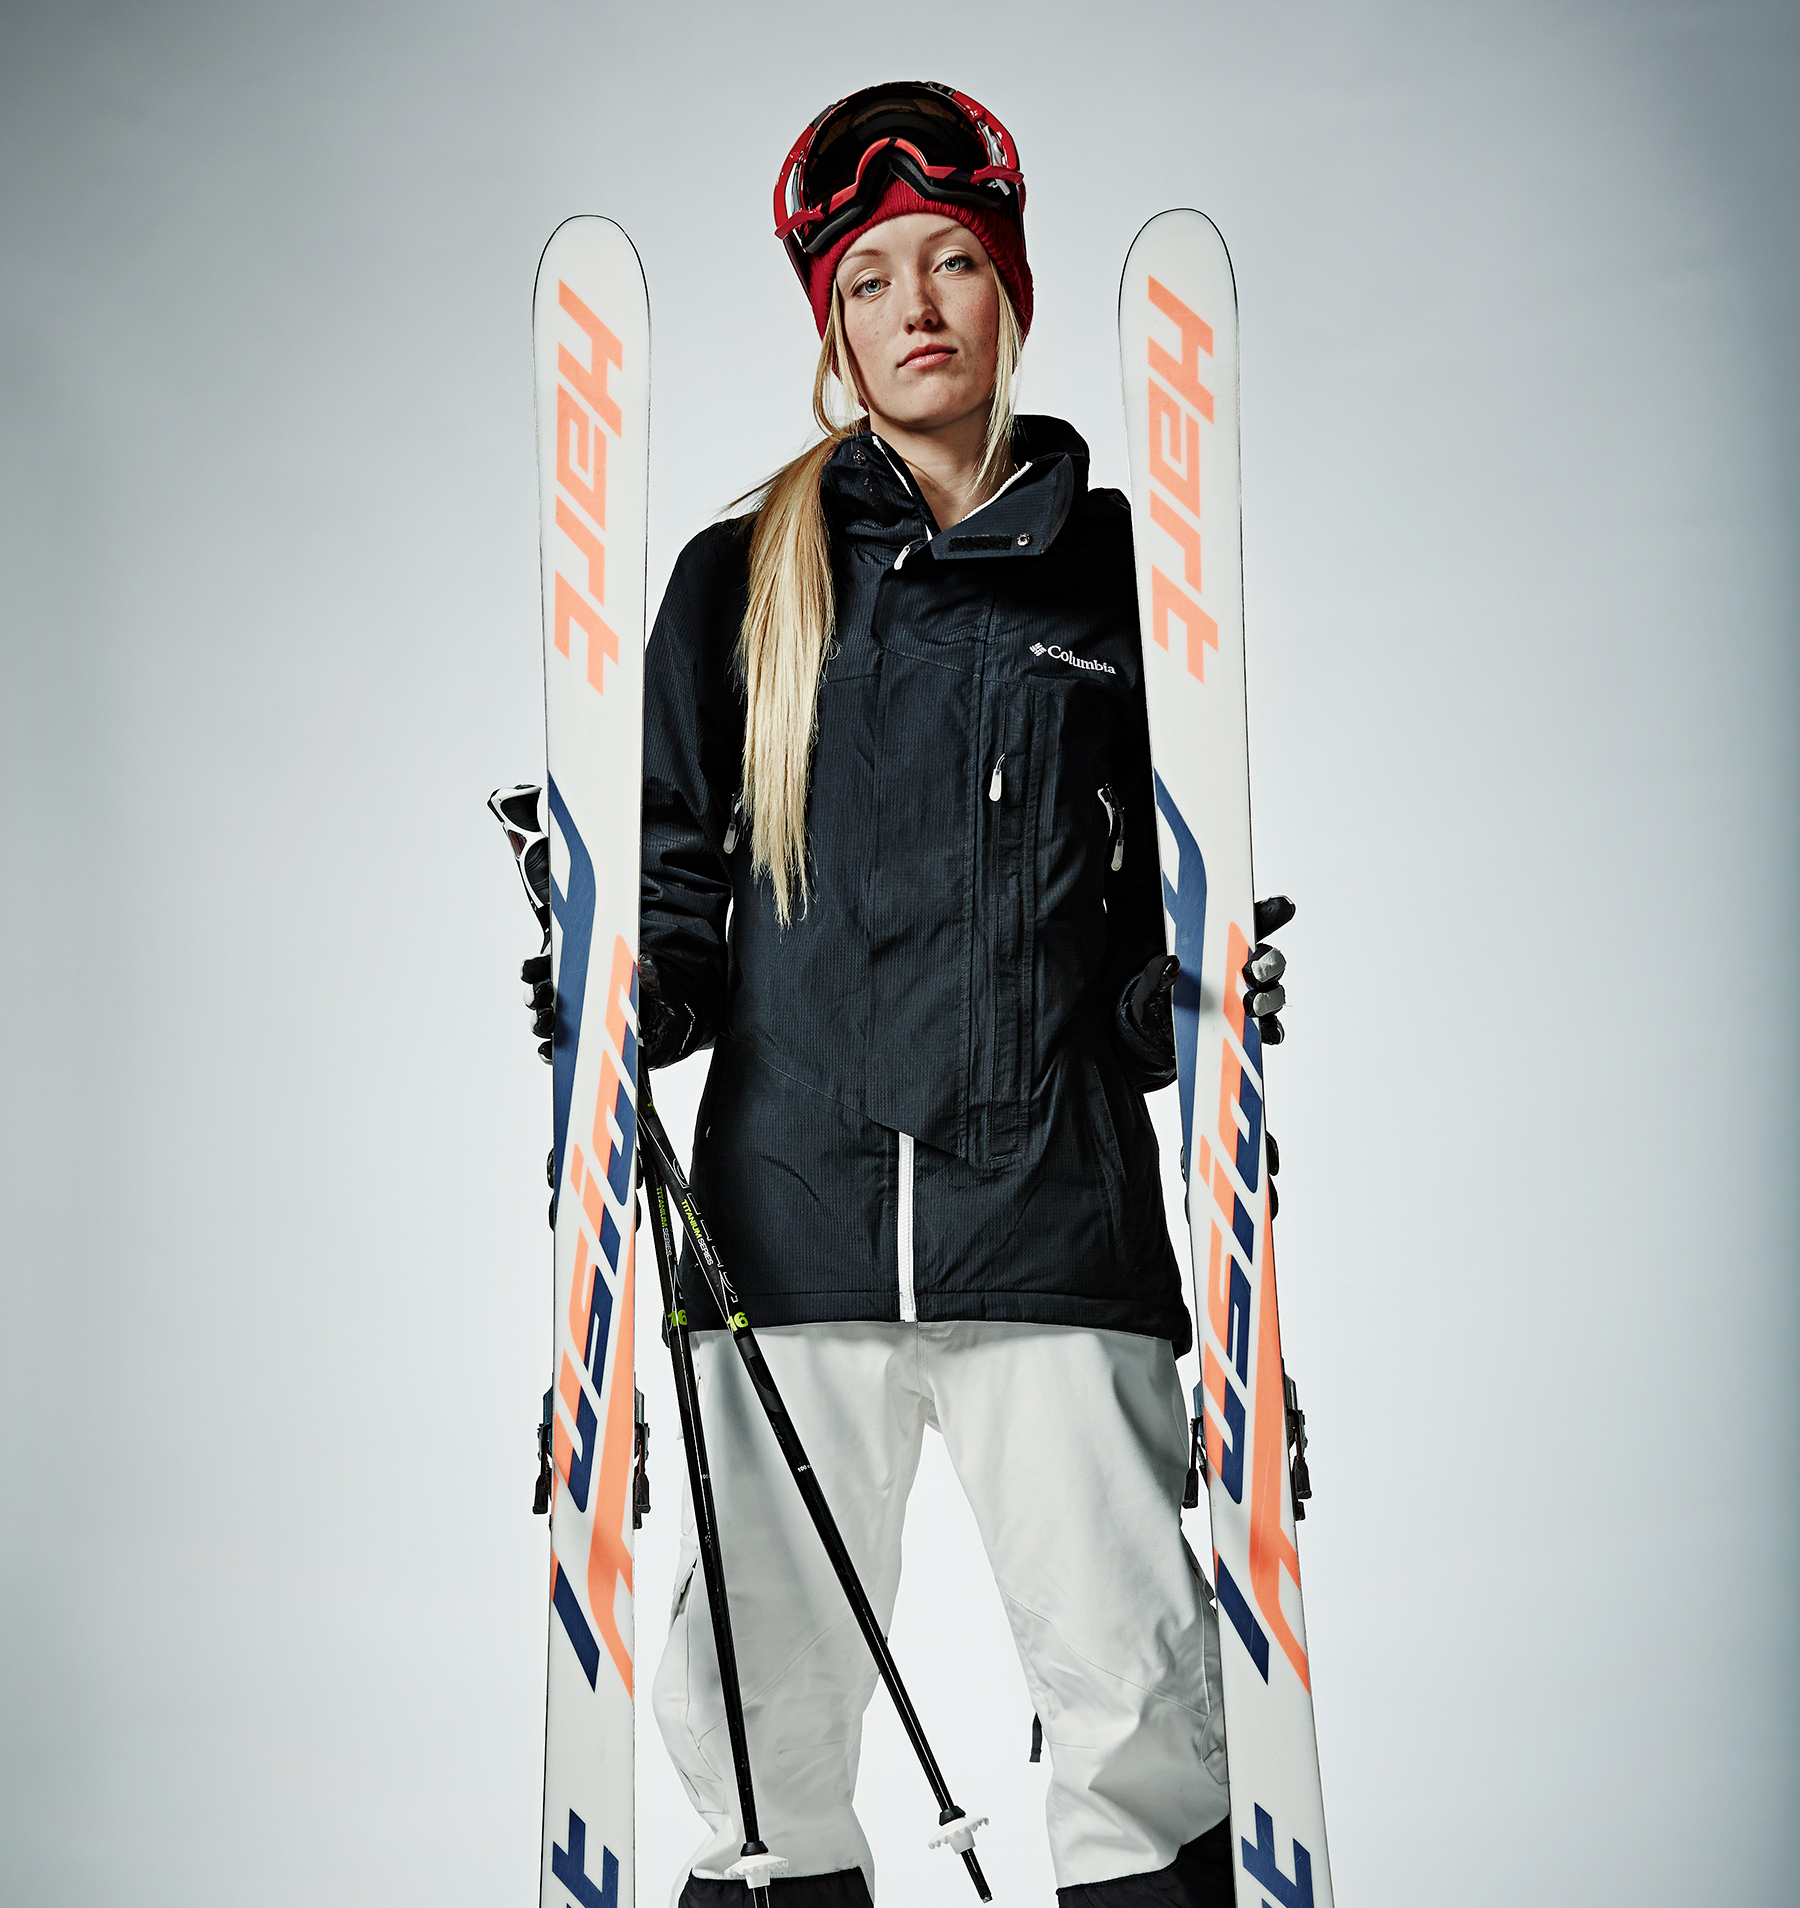 Justine Dufour-Lapointe | Olympians | Aaron Cobb Commercial Photography